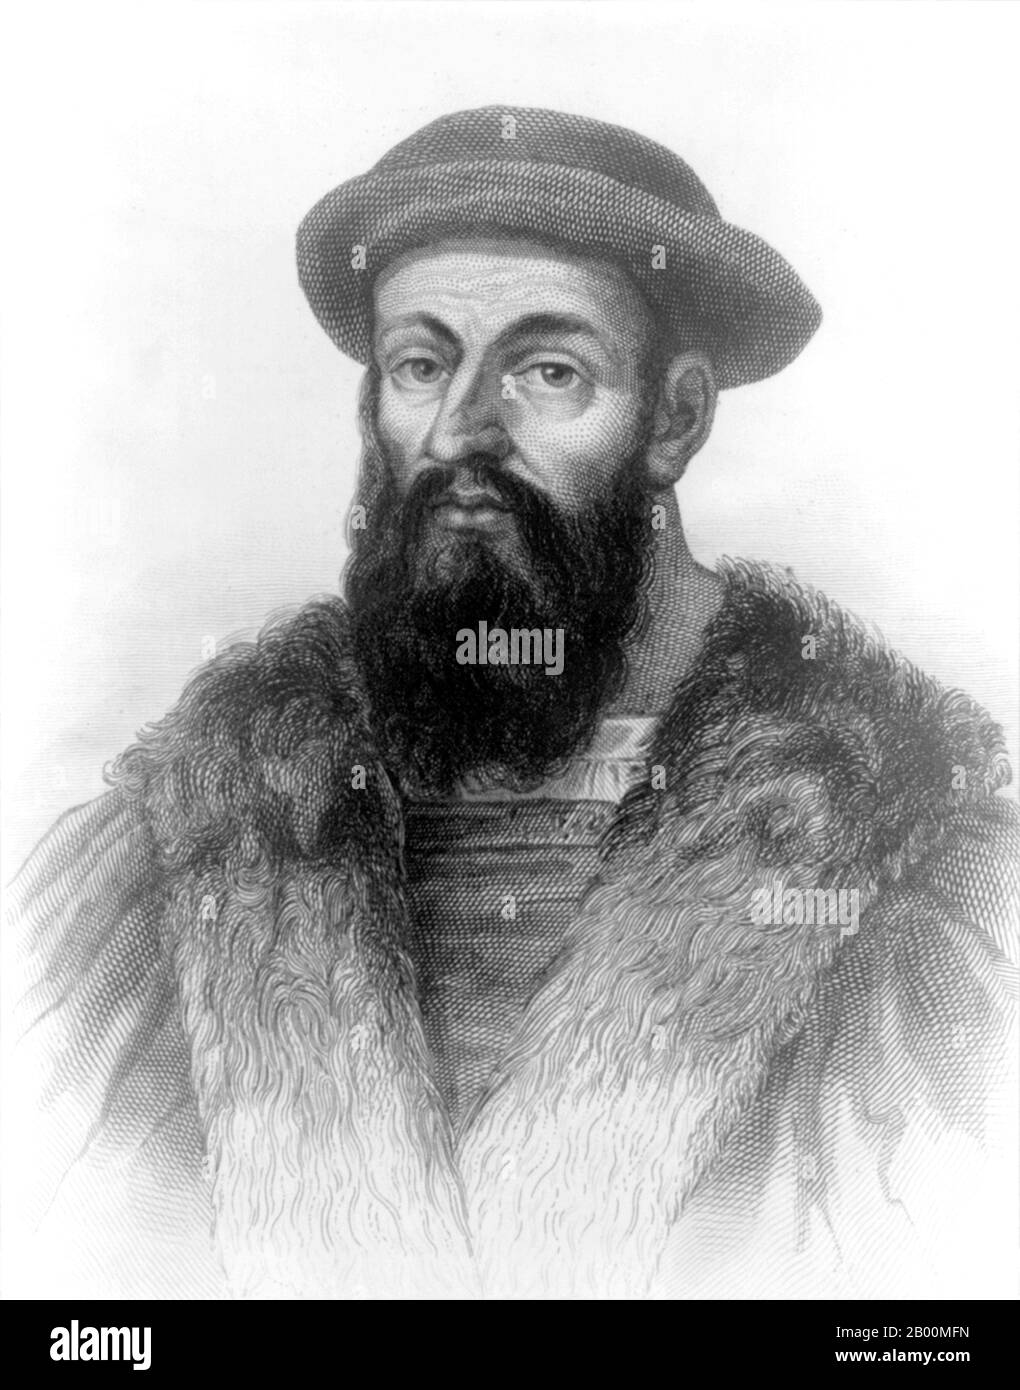 Portugal: Ferdinand Magellan (1480-1521) Portuguese explorer and circumnavigator. Engraving by an unknown artist, 1810.  Ferdinand Magellan c. 1480-April 27, 1521) was a Portuguese  explorer. He was born at Sabrosa, in northern Portugal, but later obtained Spanish nationality in order to serve King Charles I of Spain in search of a westward route to the Spice Islands (modern Maluku Islands in Indonesia). Magellan's expedition of 1519-1522 became the first expedition to sail from the Atlantic Ocean into the Pacific Ocean and the first to cross the Pacific. Stock Photo